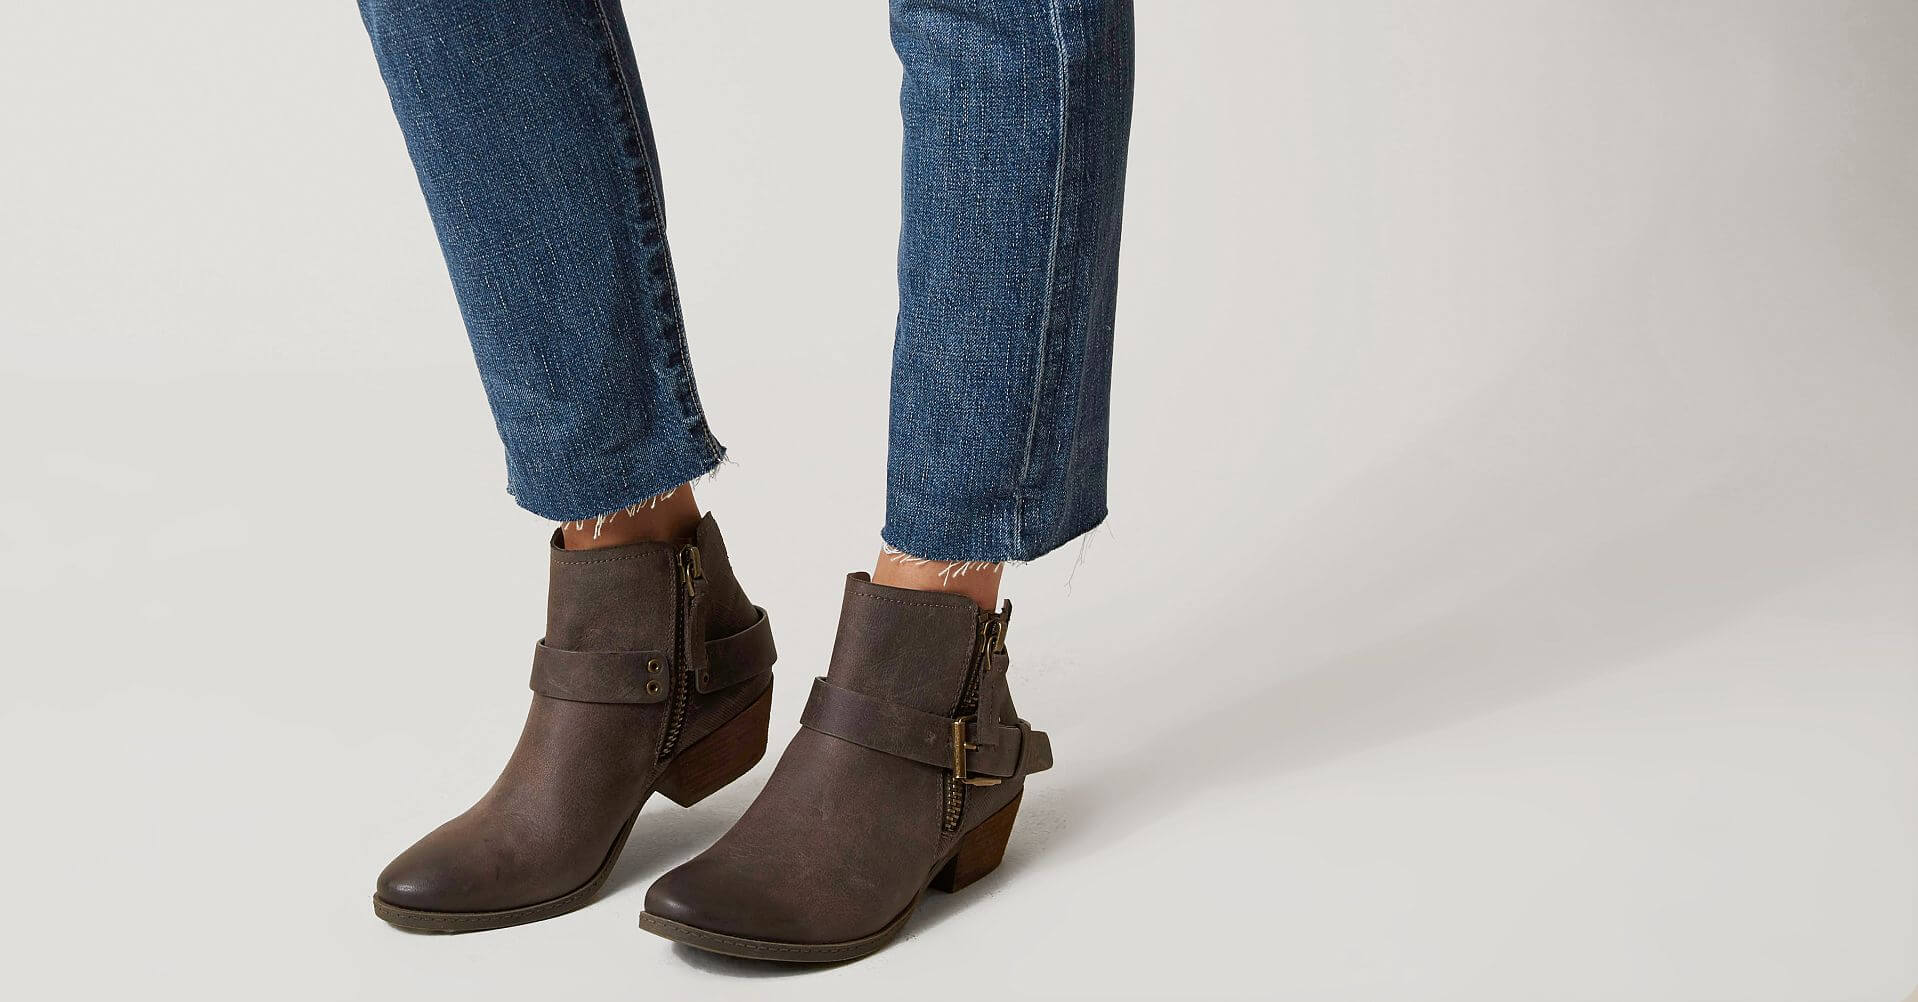 Not Rated Tessa Ankle Boot - Women's Shoes in Taupe | Buckle